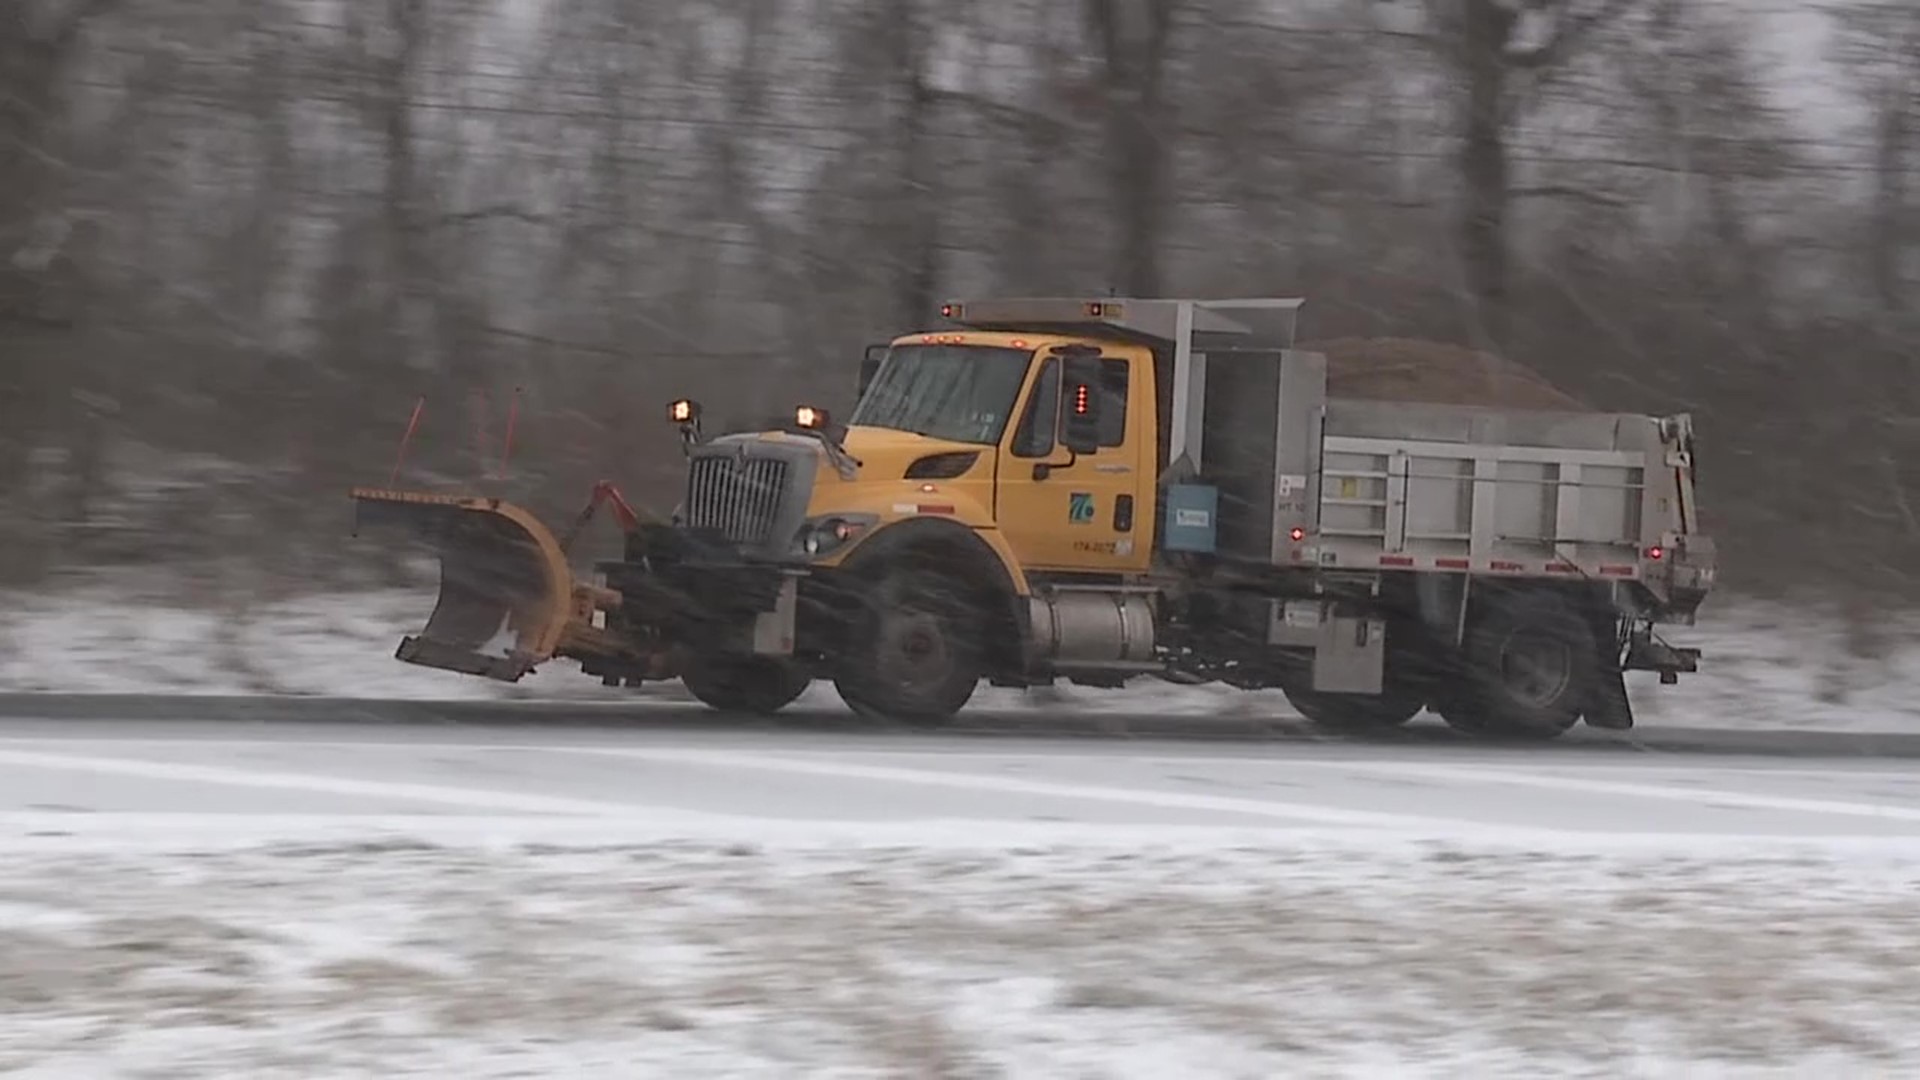 The speed limits across the area are reduced because of the winter storm.